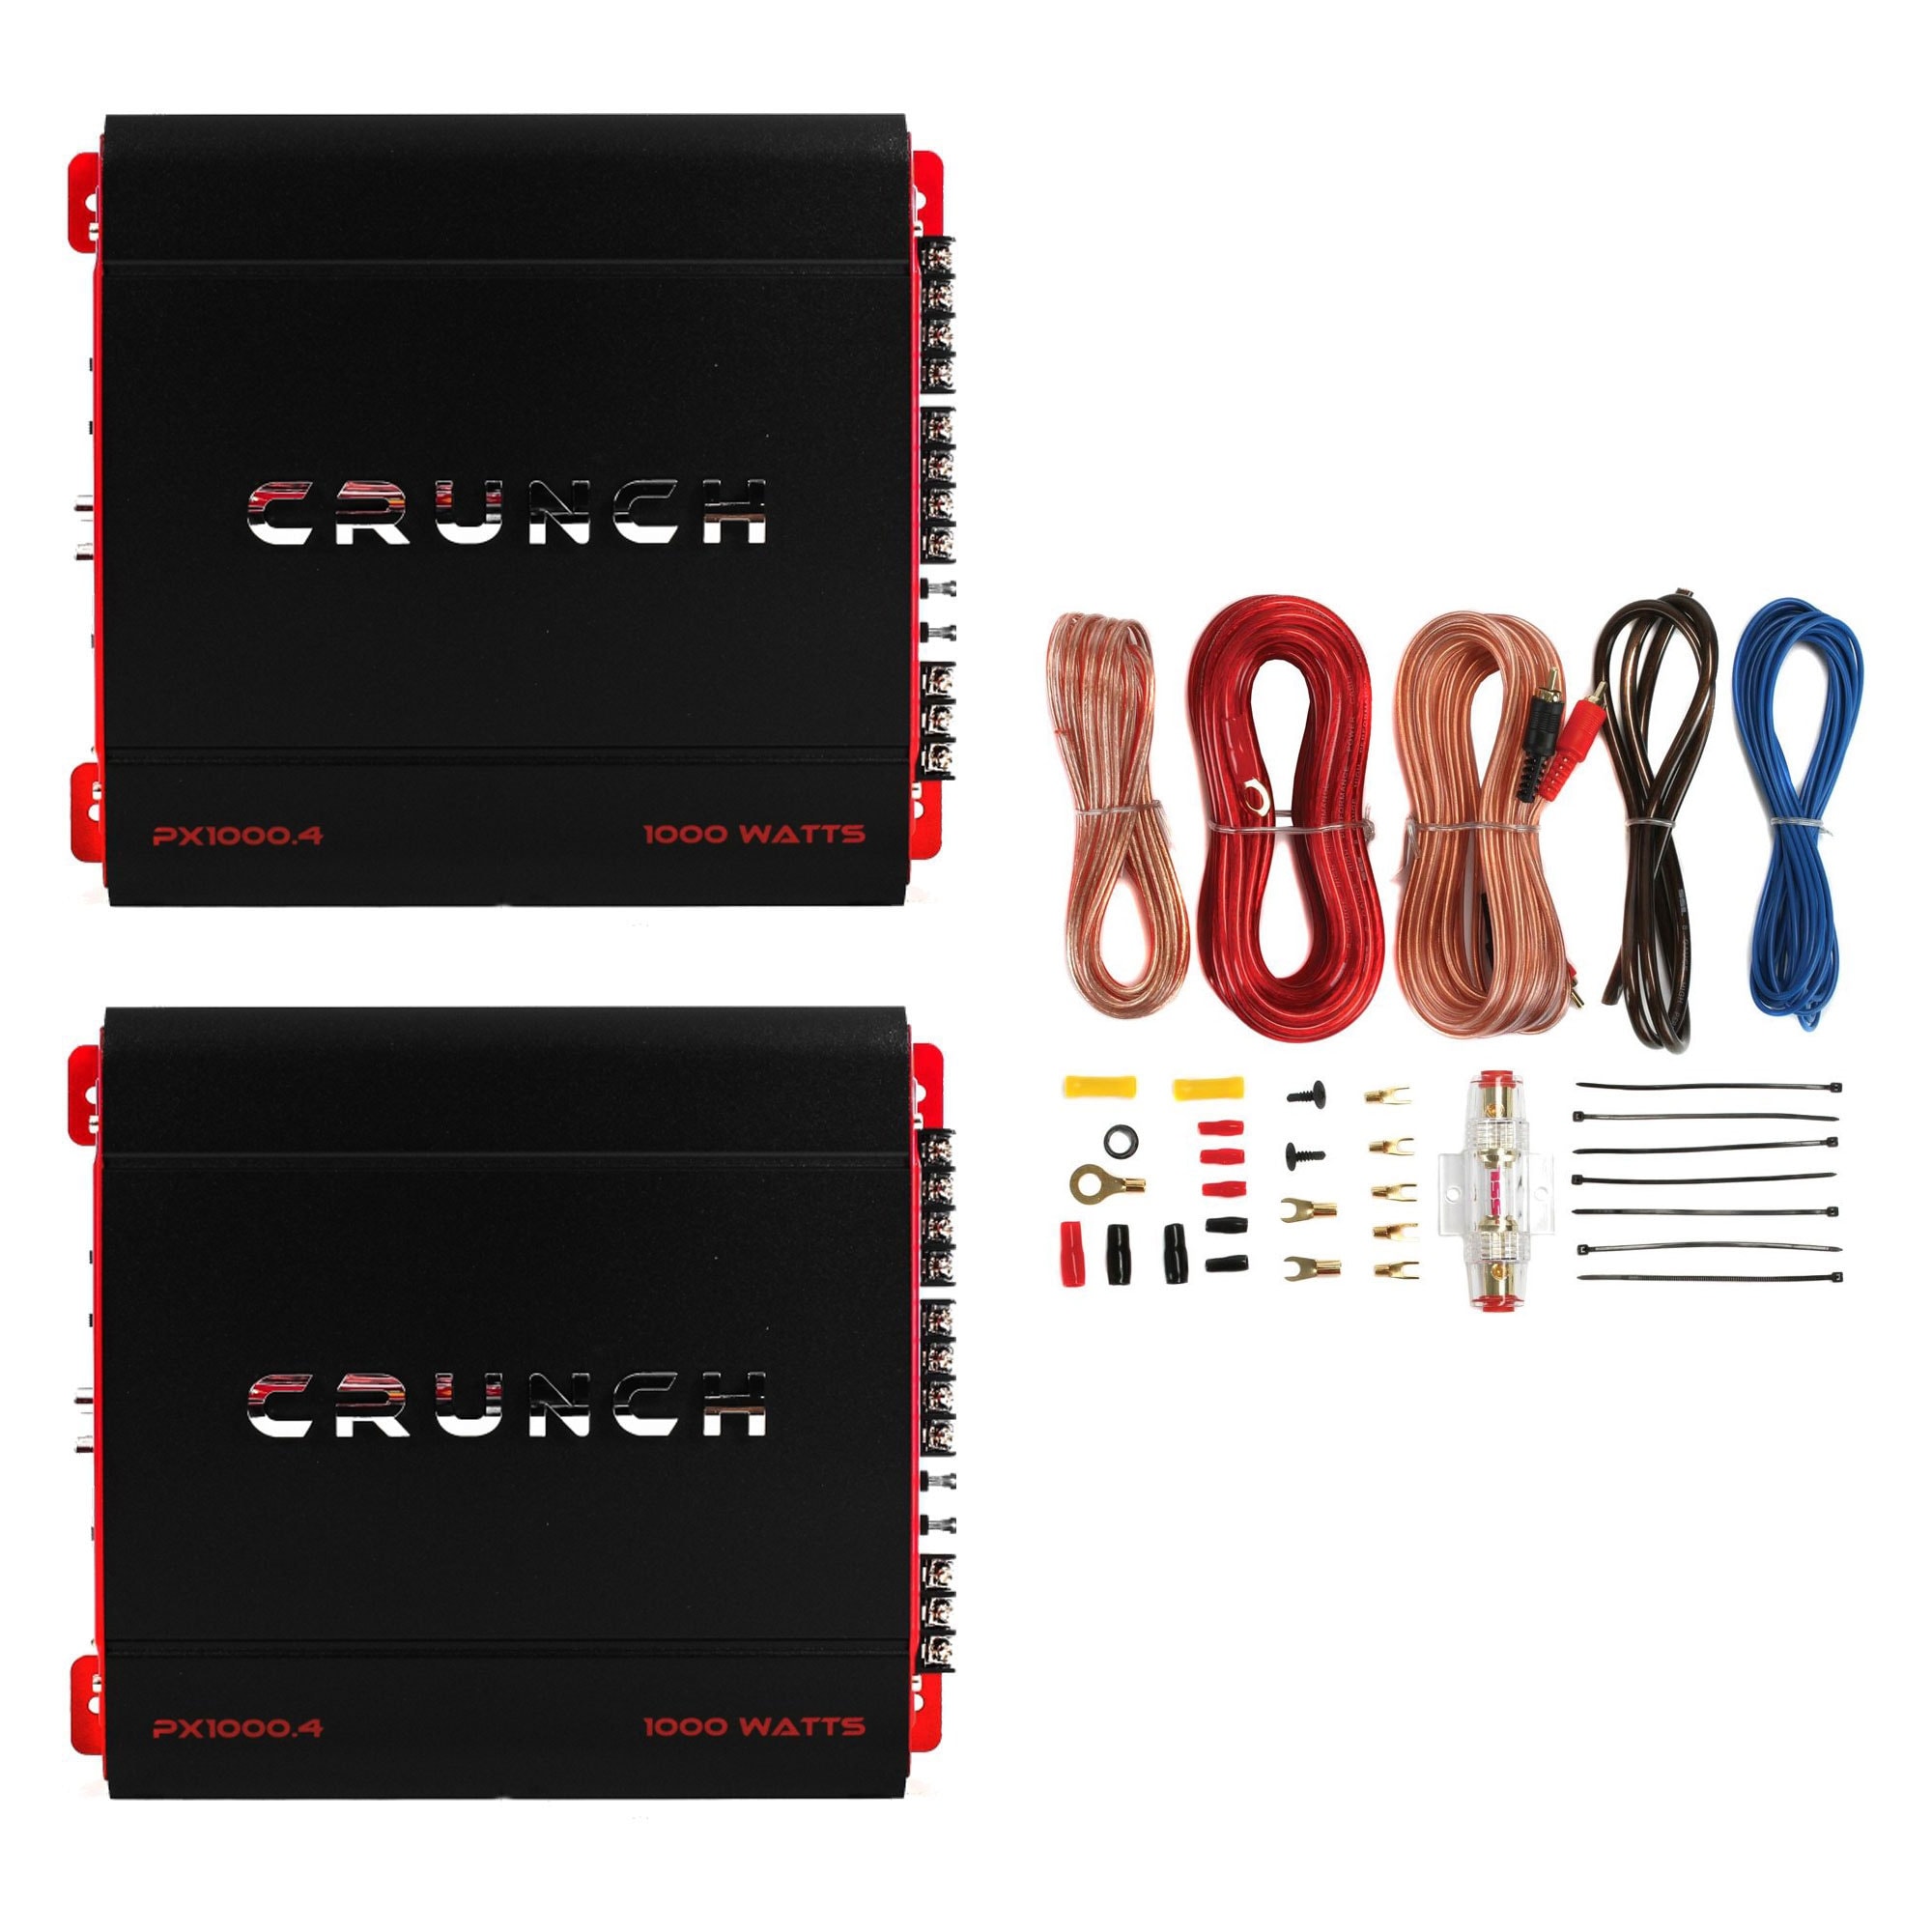 Crunch 4 Channel 1000W A/B Class Stereo Amplifier (2 Pack) & Wiring Kit - Black